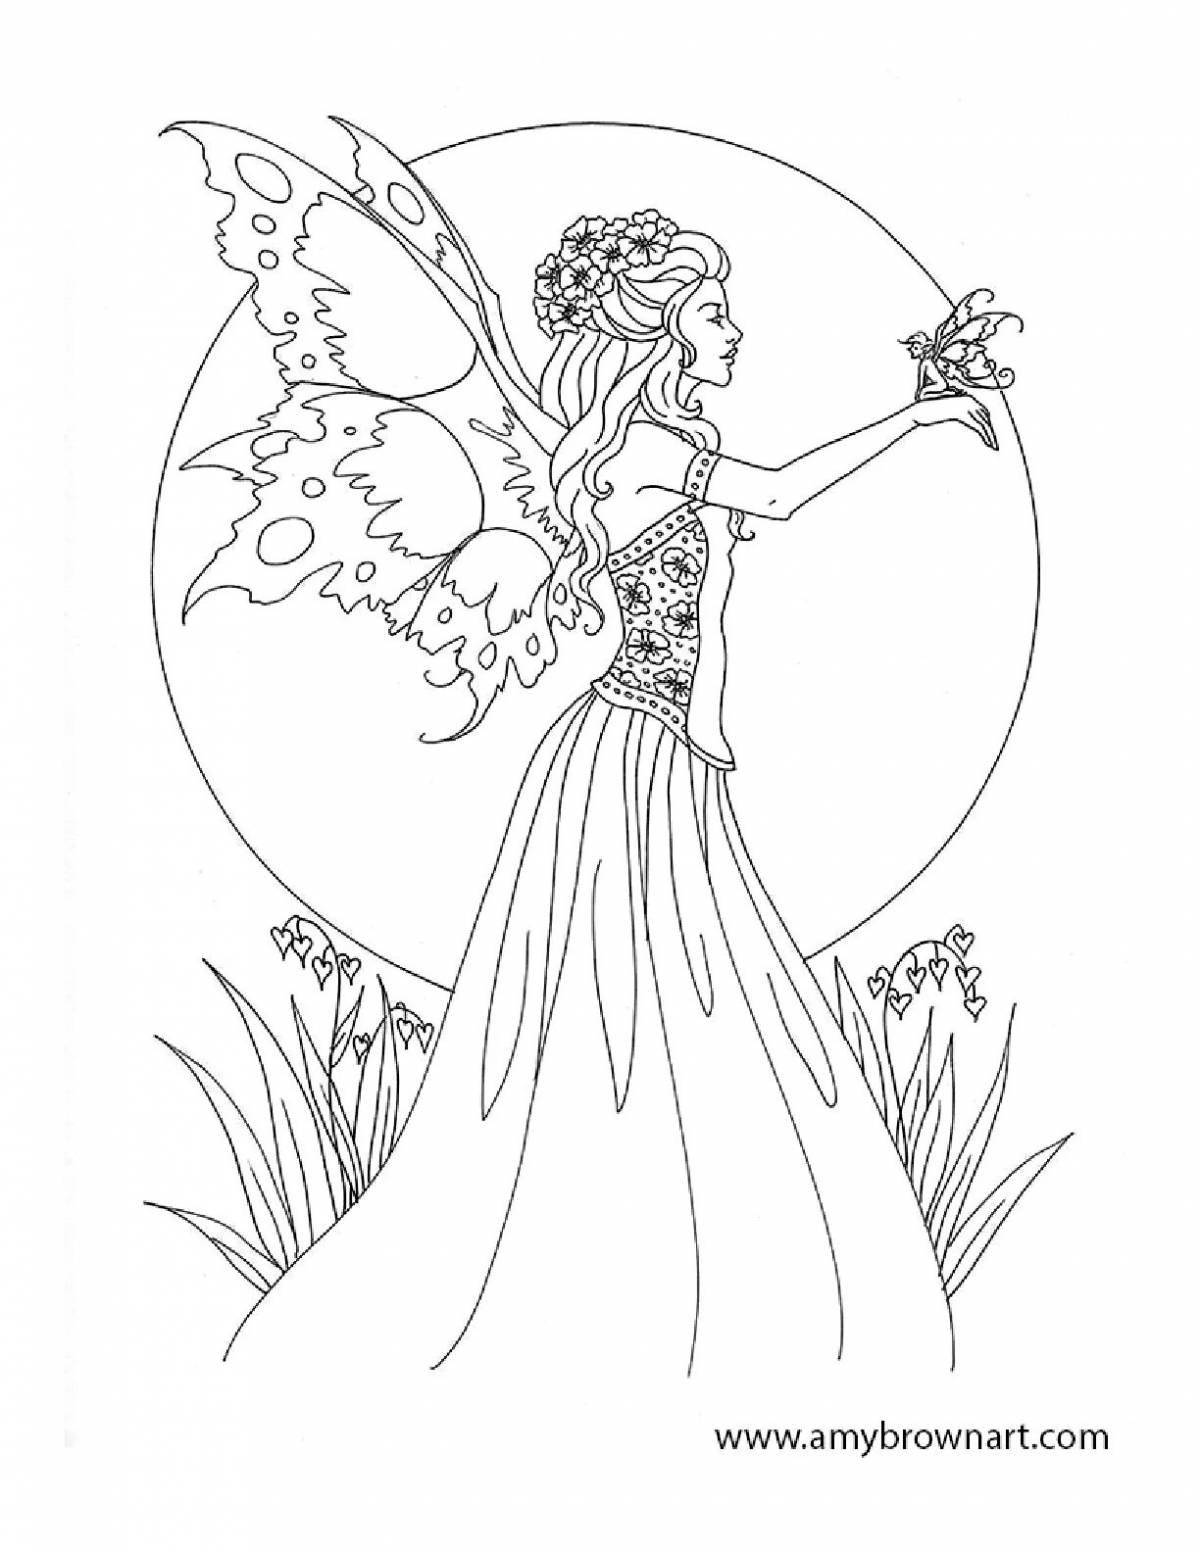 Awesome forest fairy coloring page